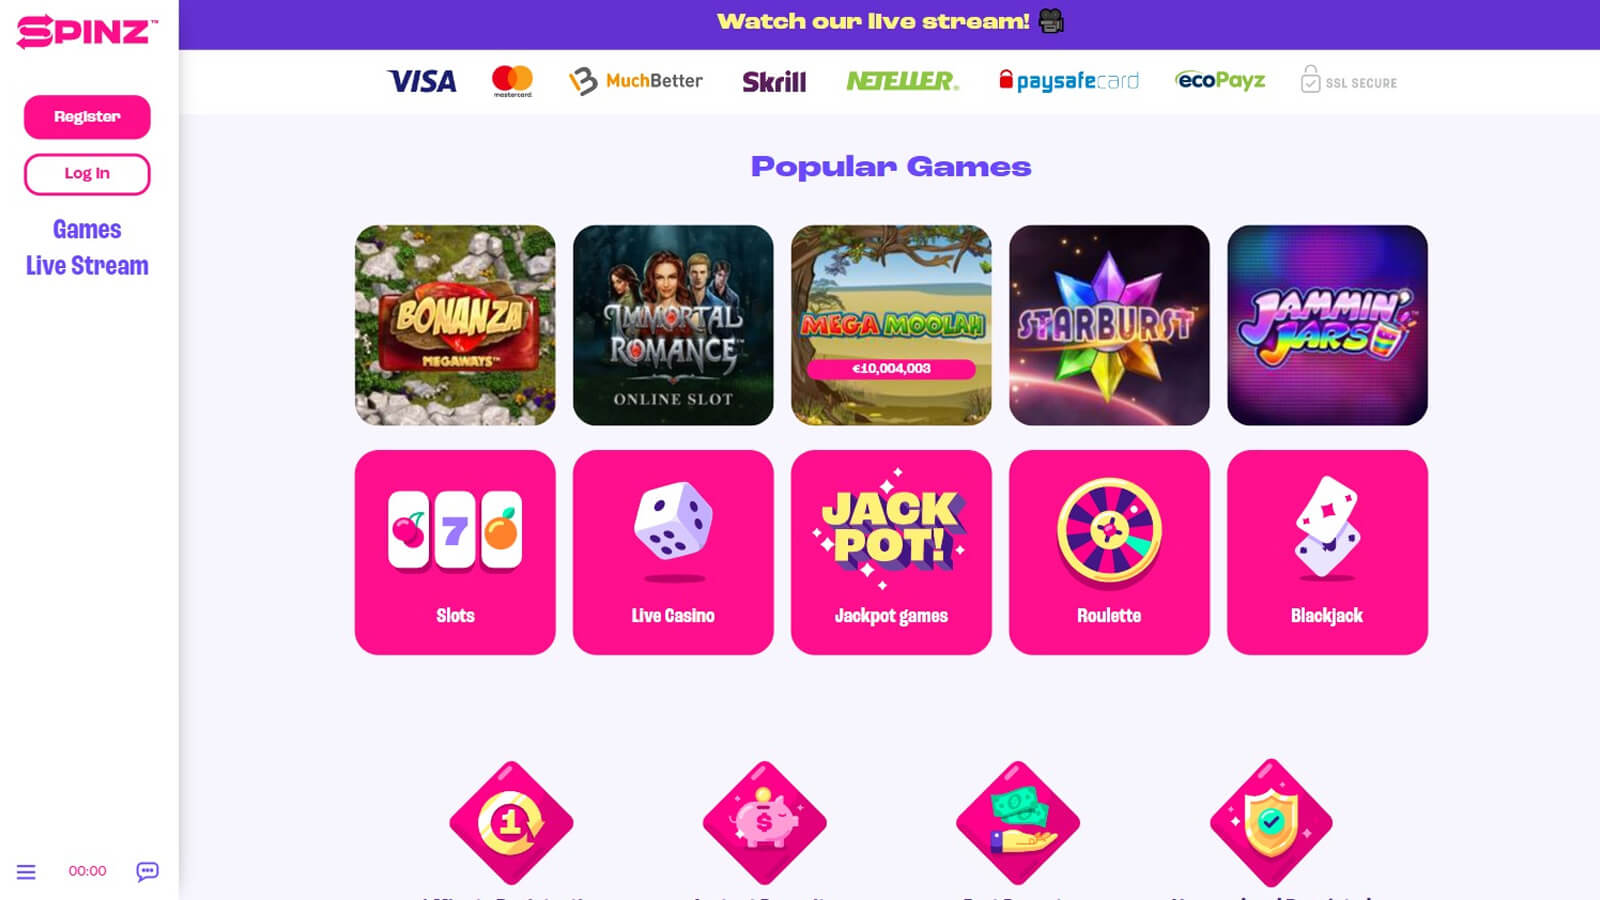 Spinz Casino #3. Best new online casino in Canada for high-rollers